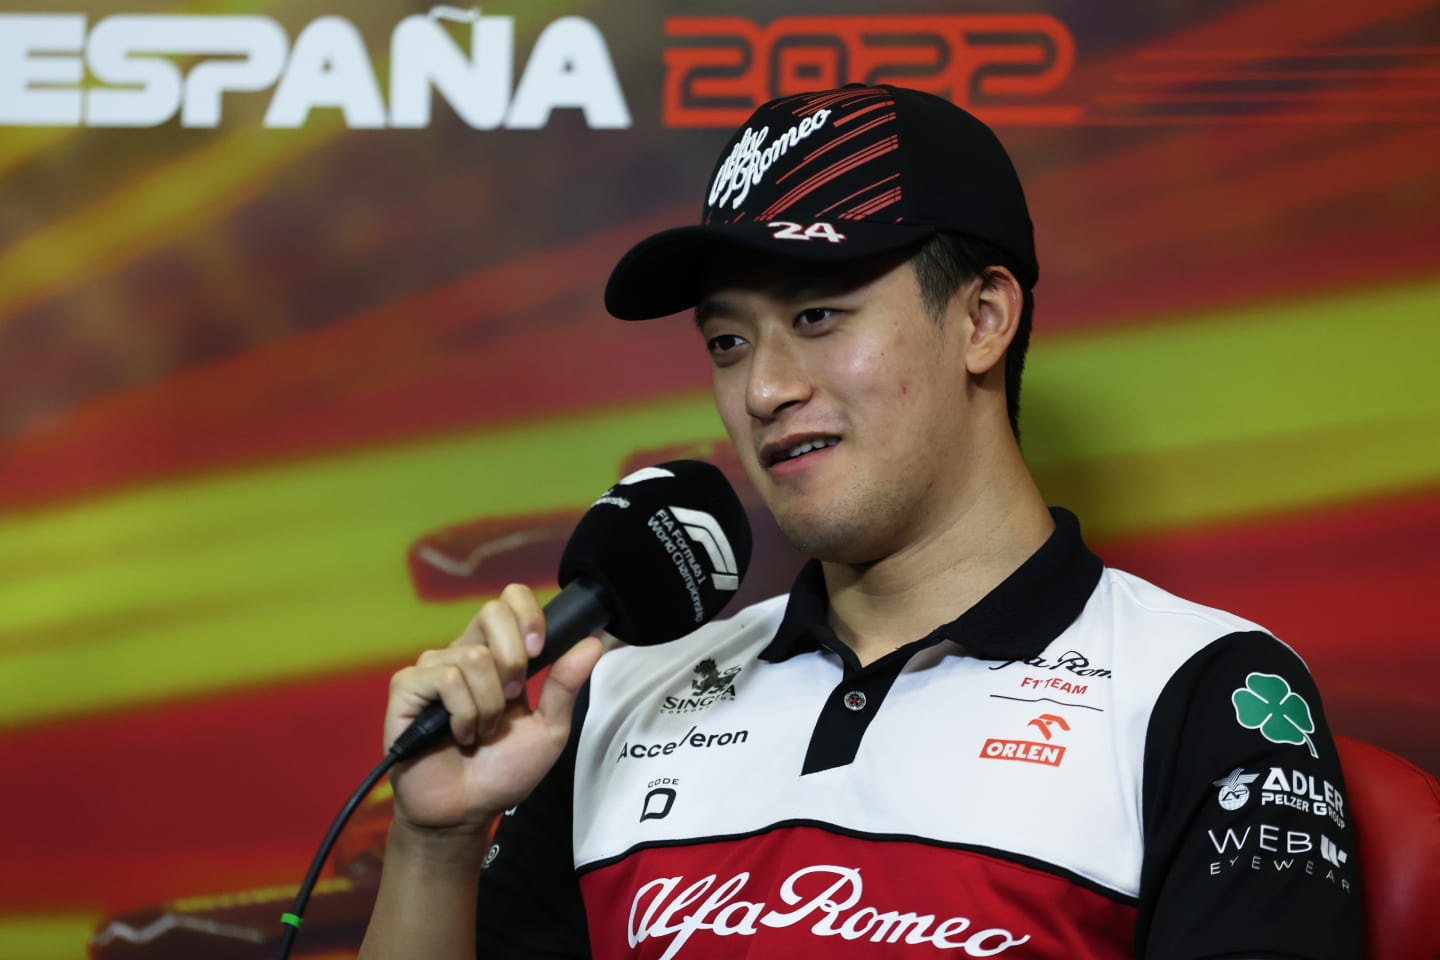 BARCELONA, SPAIN - MAY 20: Zhou Guanyu of China and Alfa Romeo F1 talks in the Drivers Press Conference prior to practice ahead of the F1 Grand Prix of Spain at Circuit de Barcelona-Catalunya on May 20, 2022 in Barcelona, Spain. (Photo by Bryn Lennon/Getty Images)